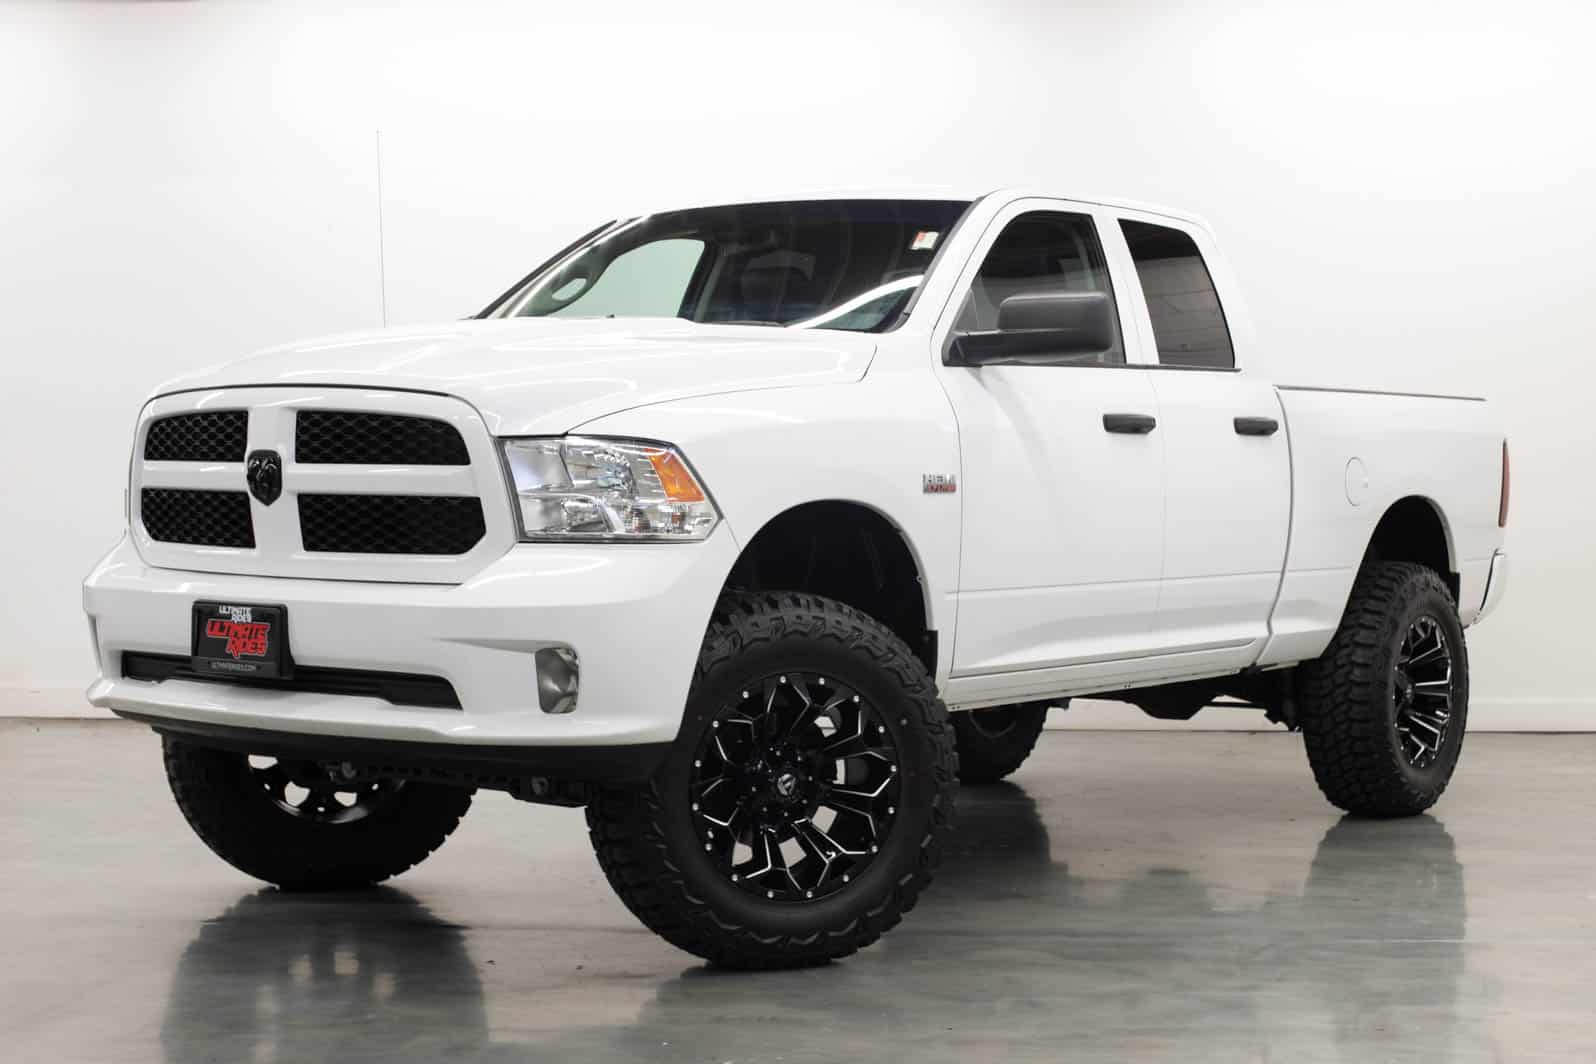 Lifted Trucks for Sale Online